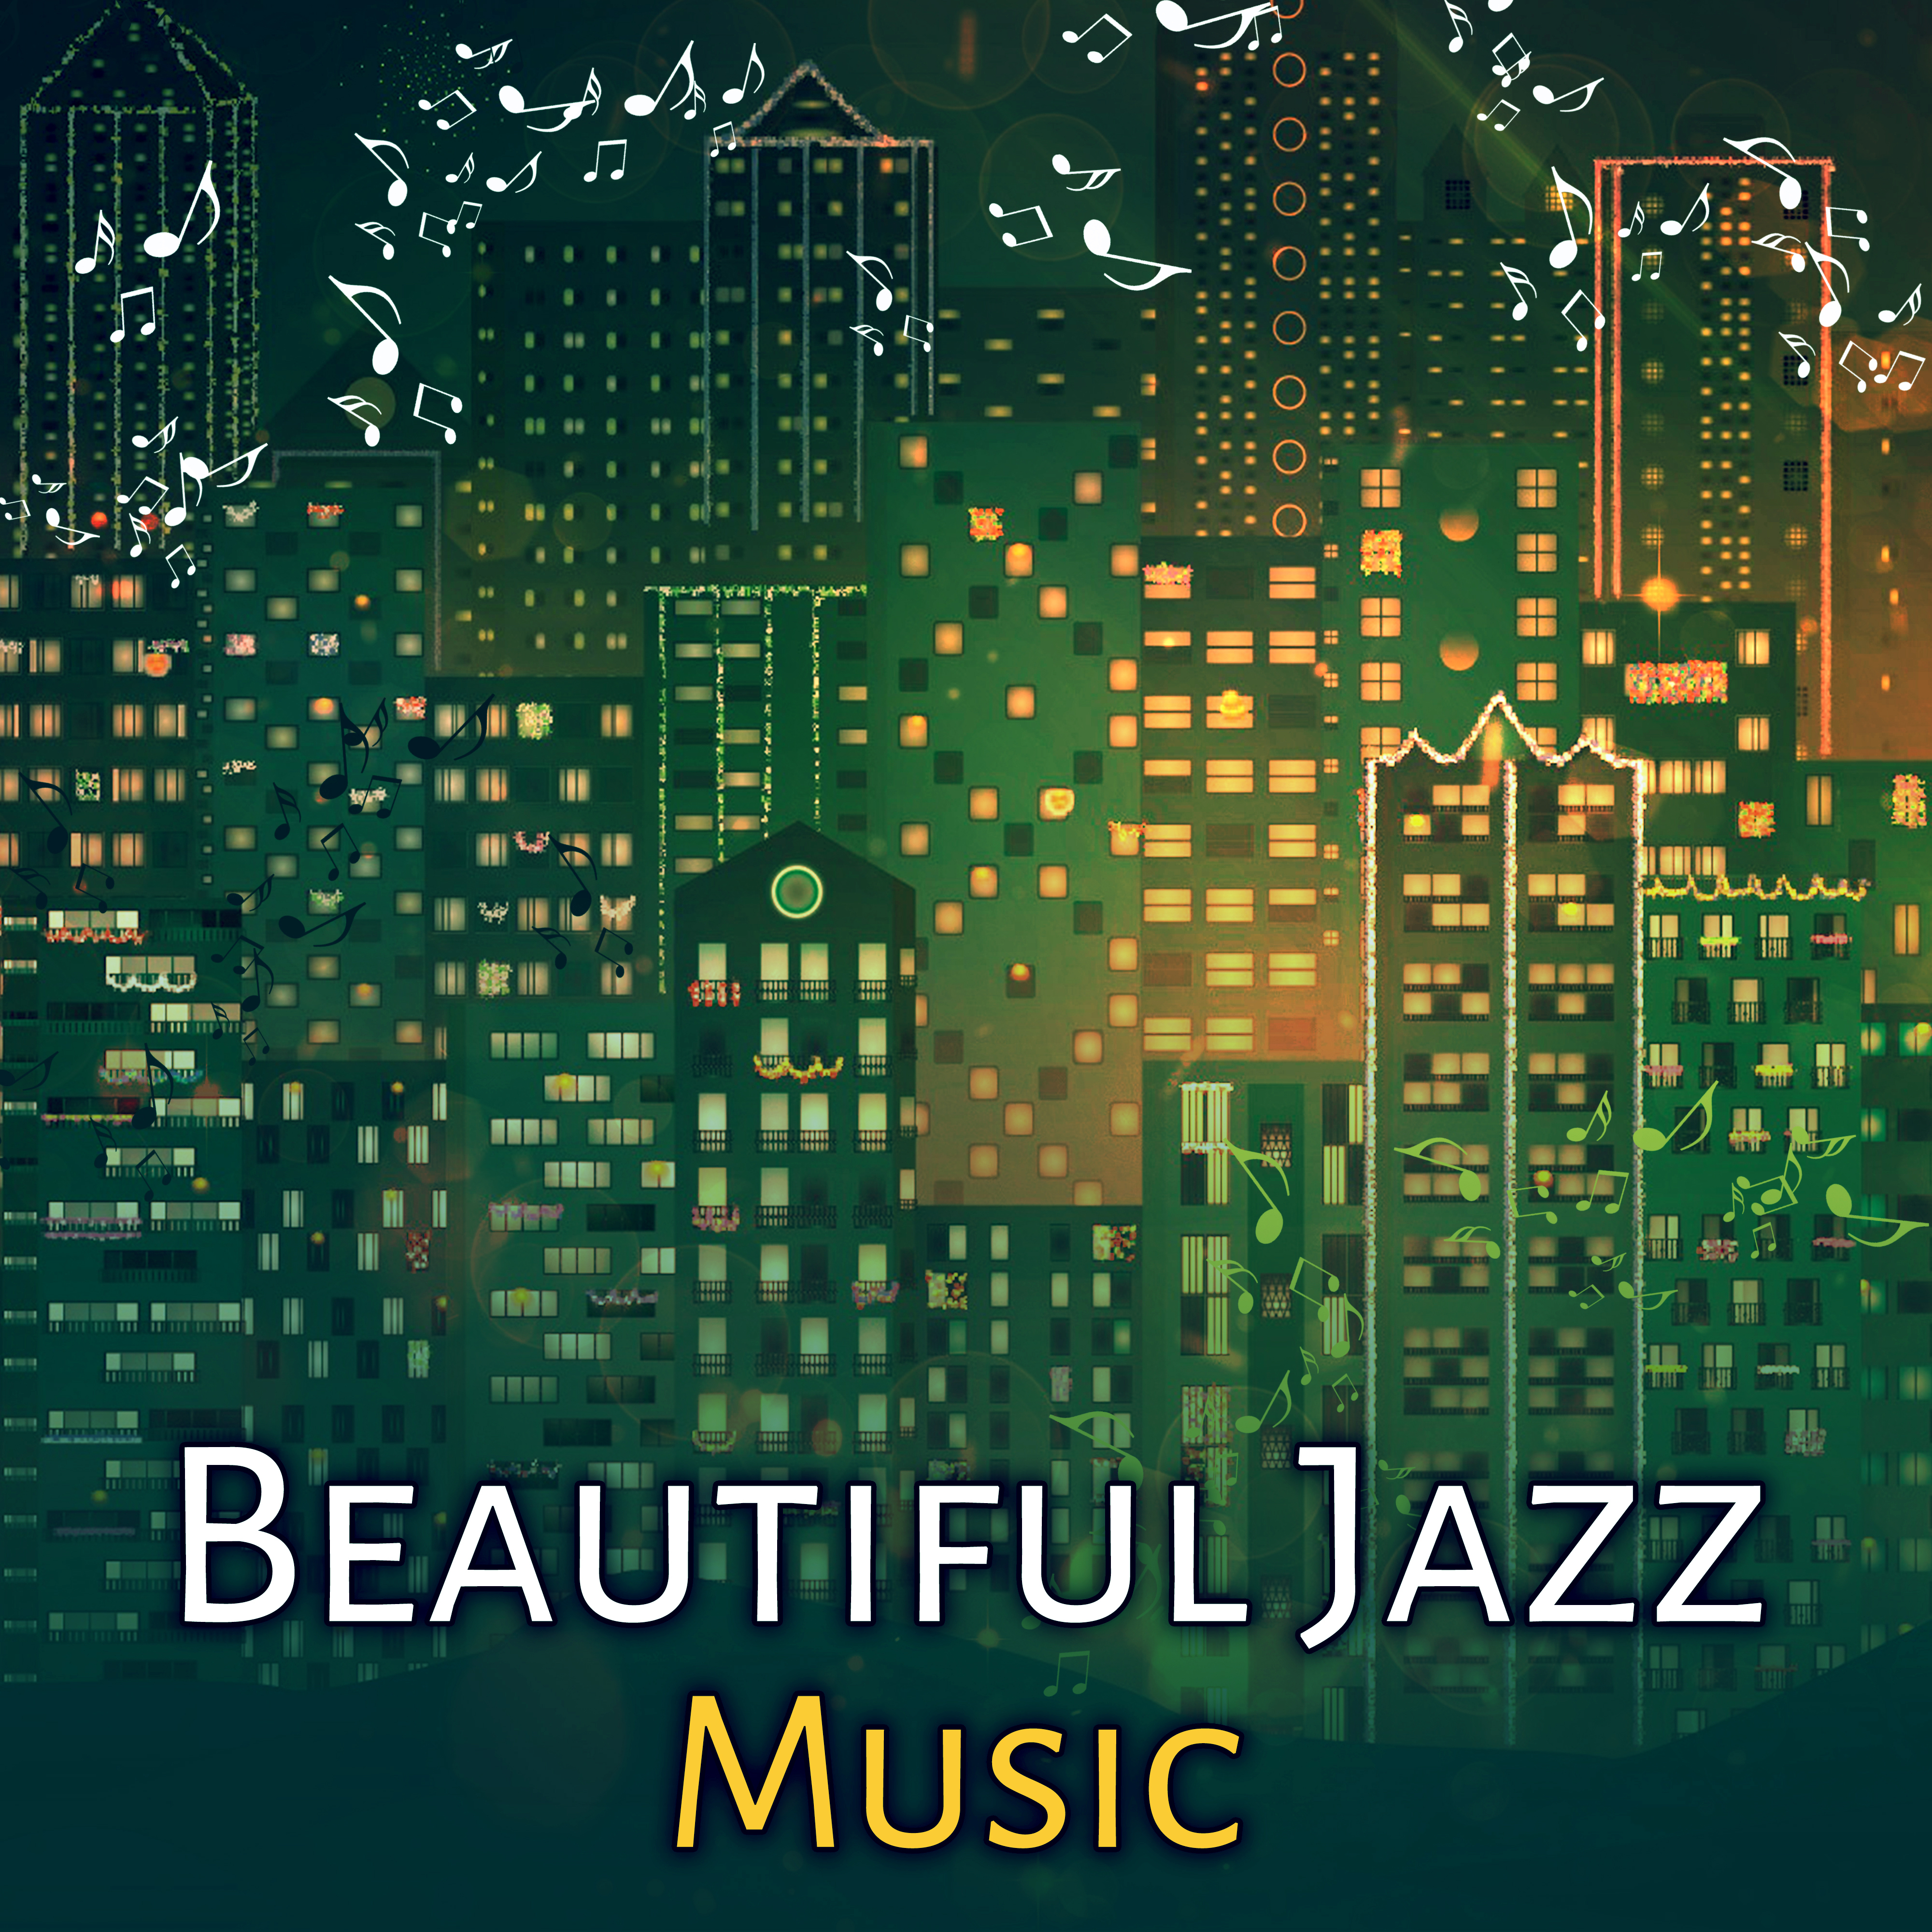 Beautiful Jazz Music  Rest with Smooth Jazz, Easy Way to Relax, Soothing Sounds, Jazz Note